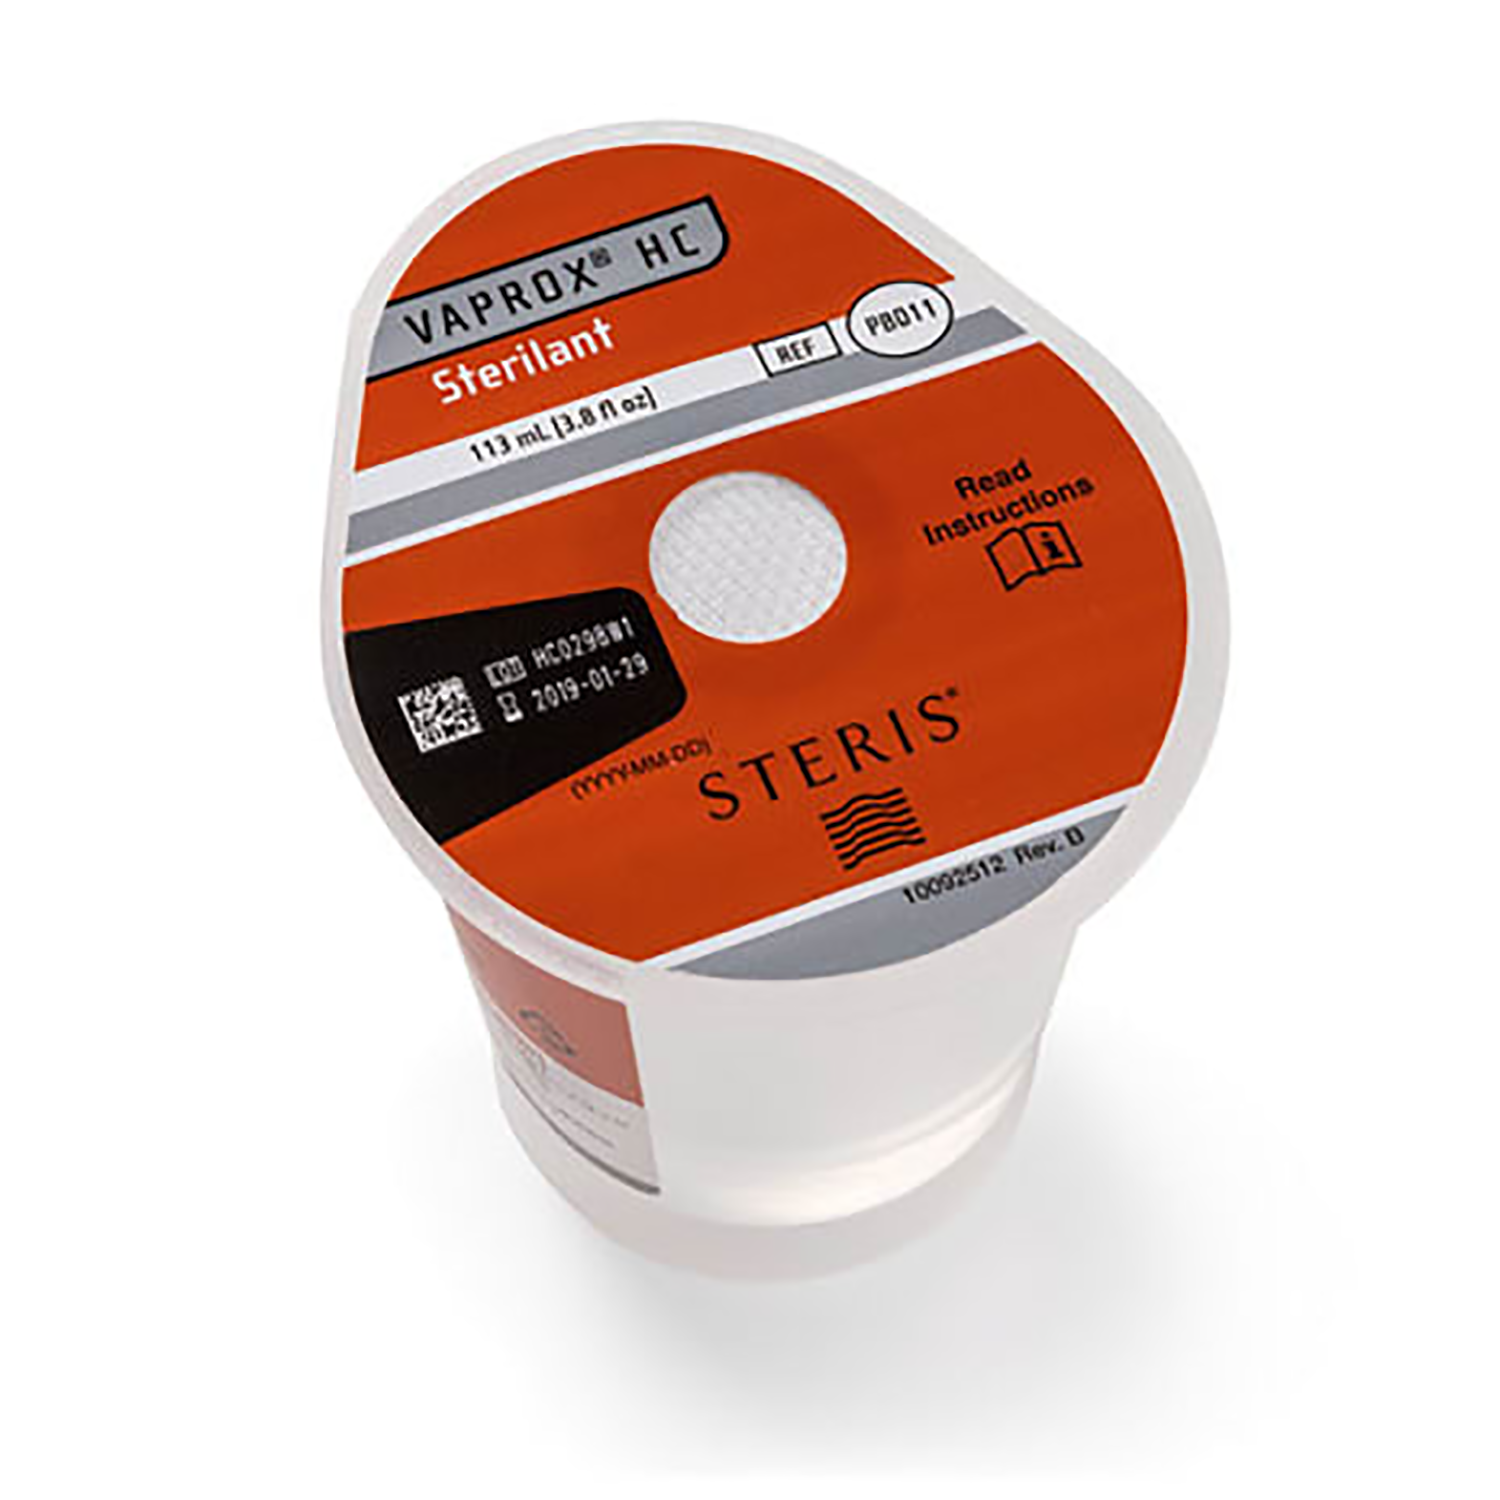 Vaprox HC Sterilant Smart Cup | 29.6ml | Pack of 4